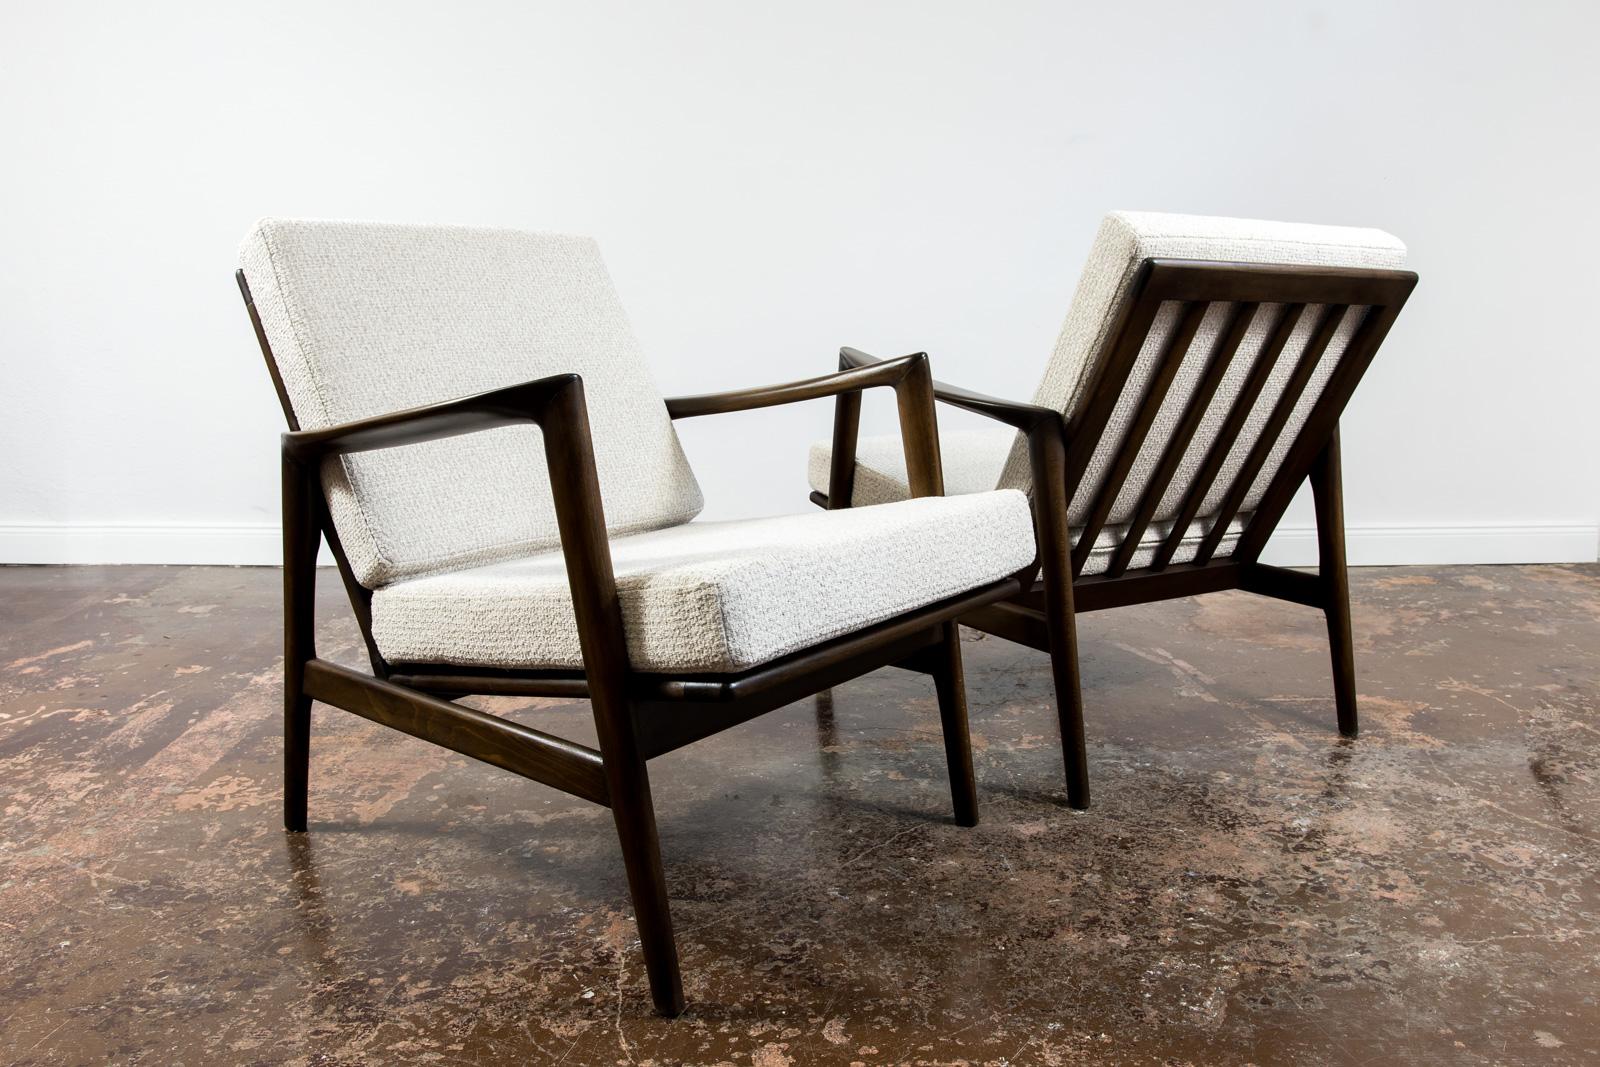 Customizable Pair of Mid Century Modern Armchairs Type 300-130, 1960s, Poland For Sale 2